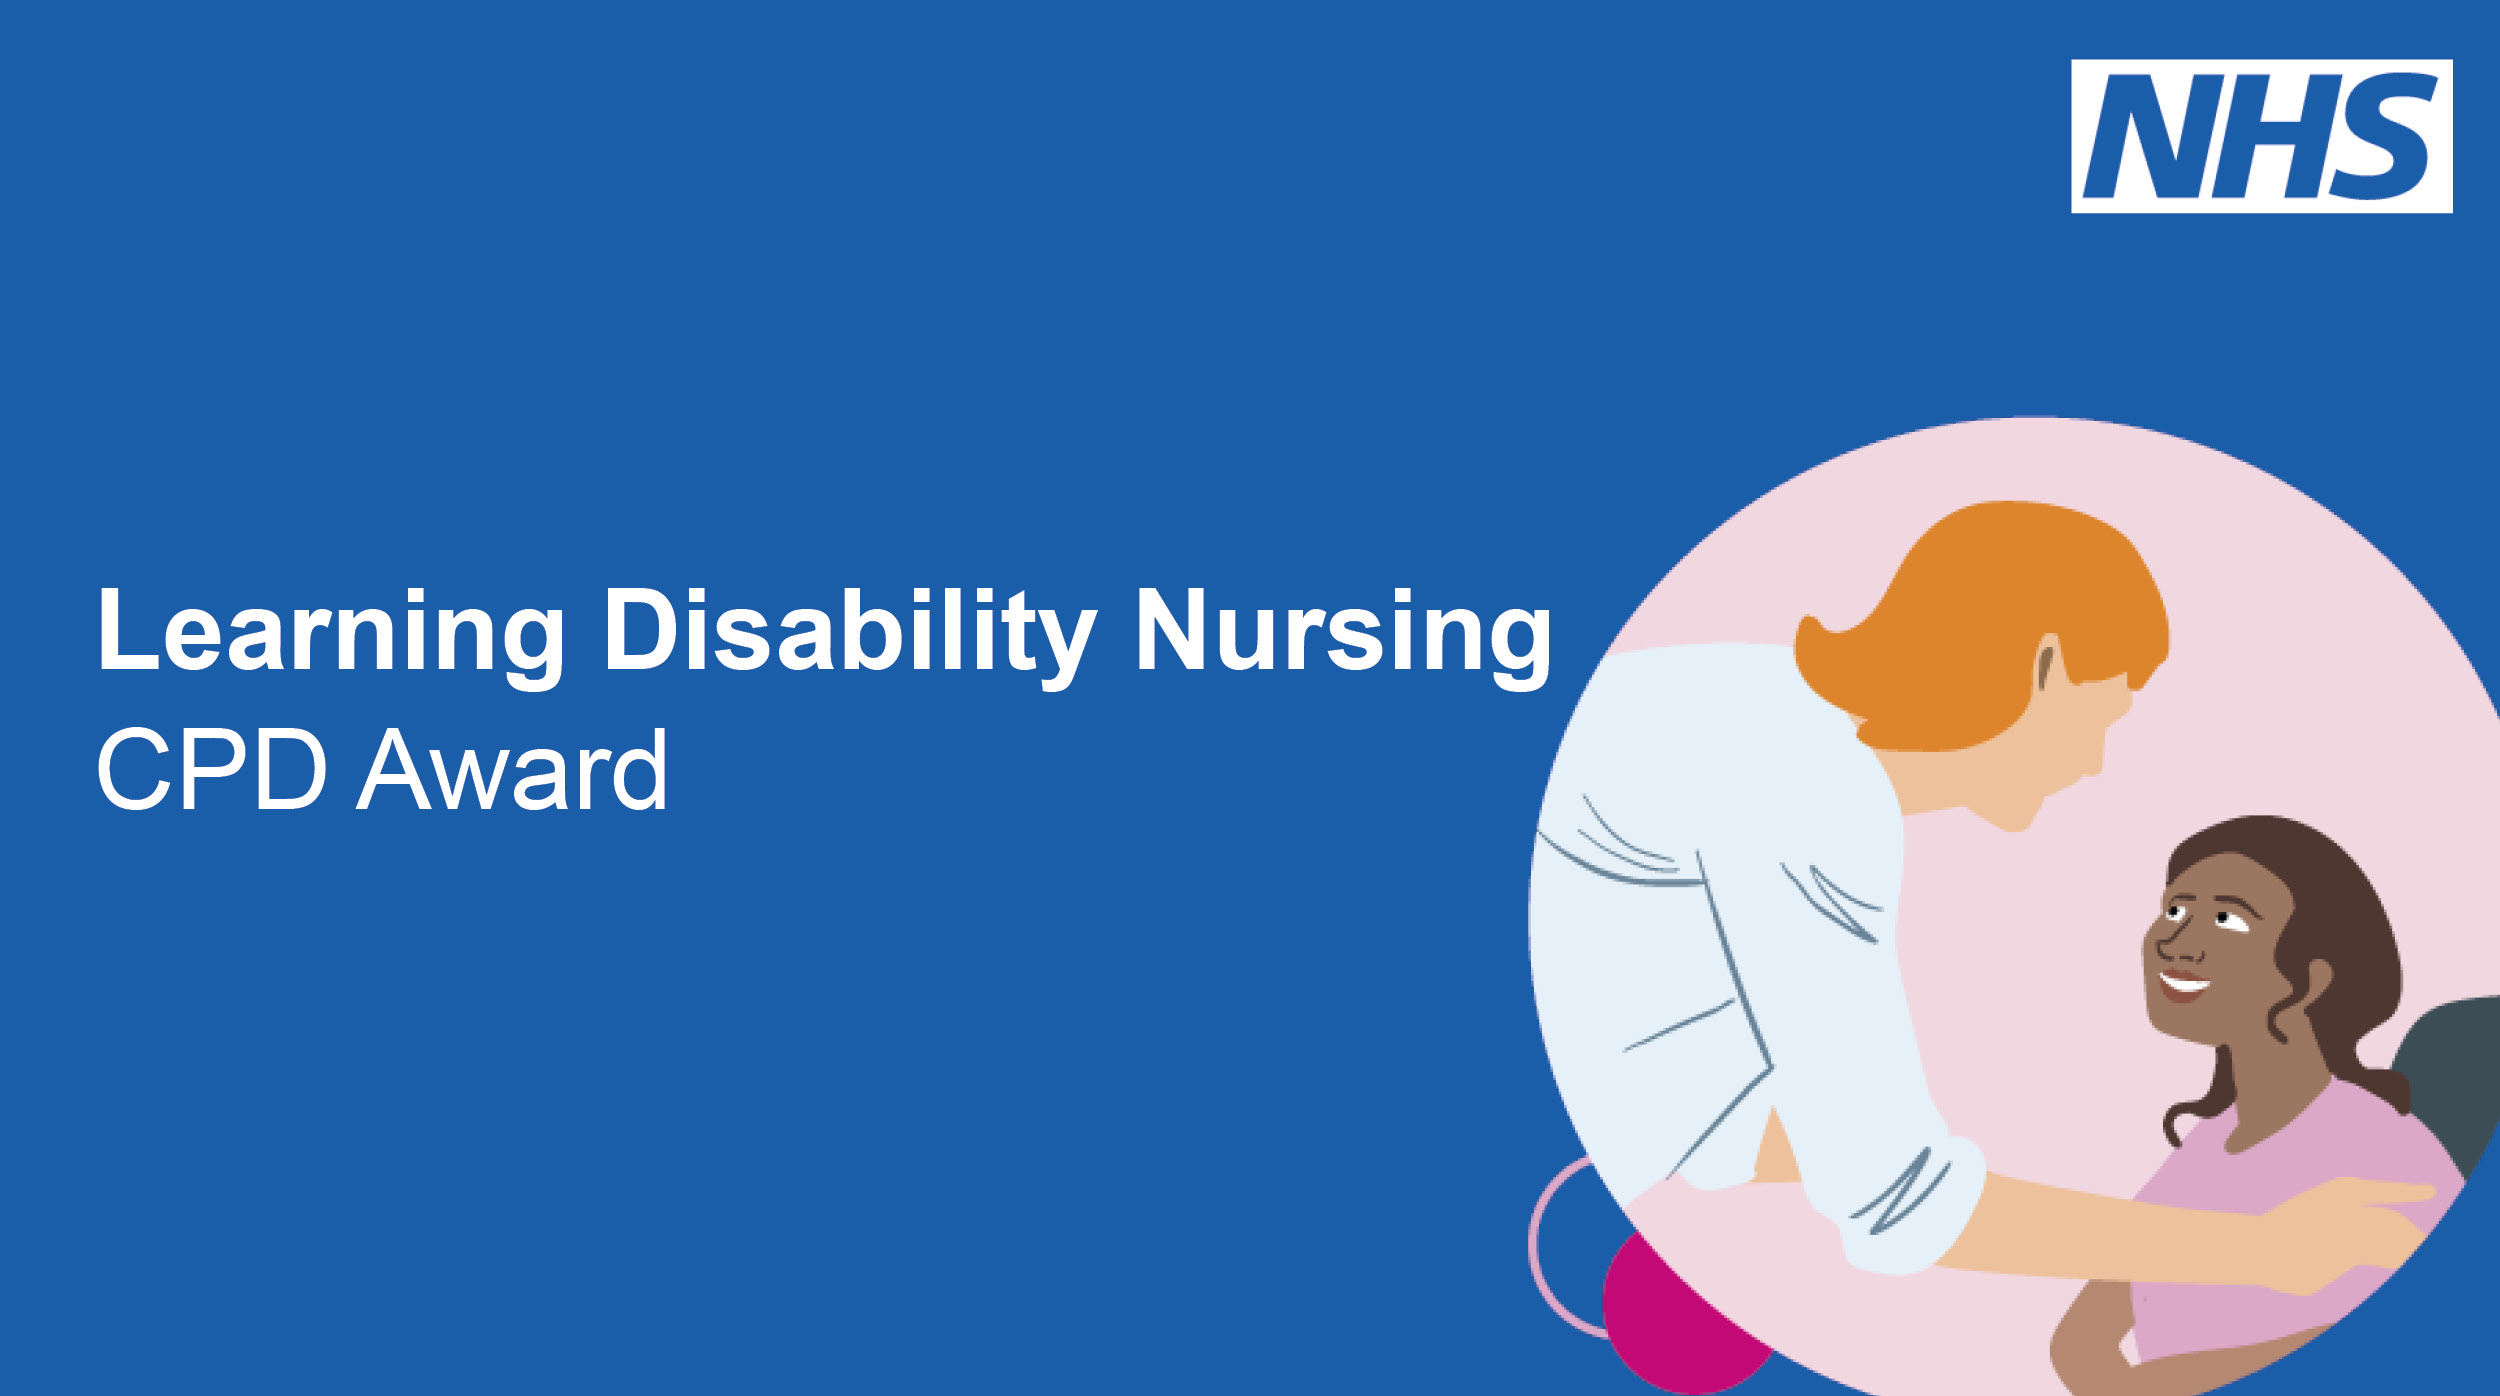 An illustration of a patient and learning disability nurse with text: 